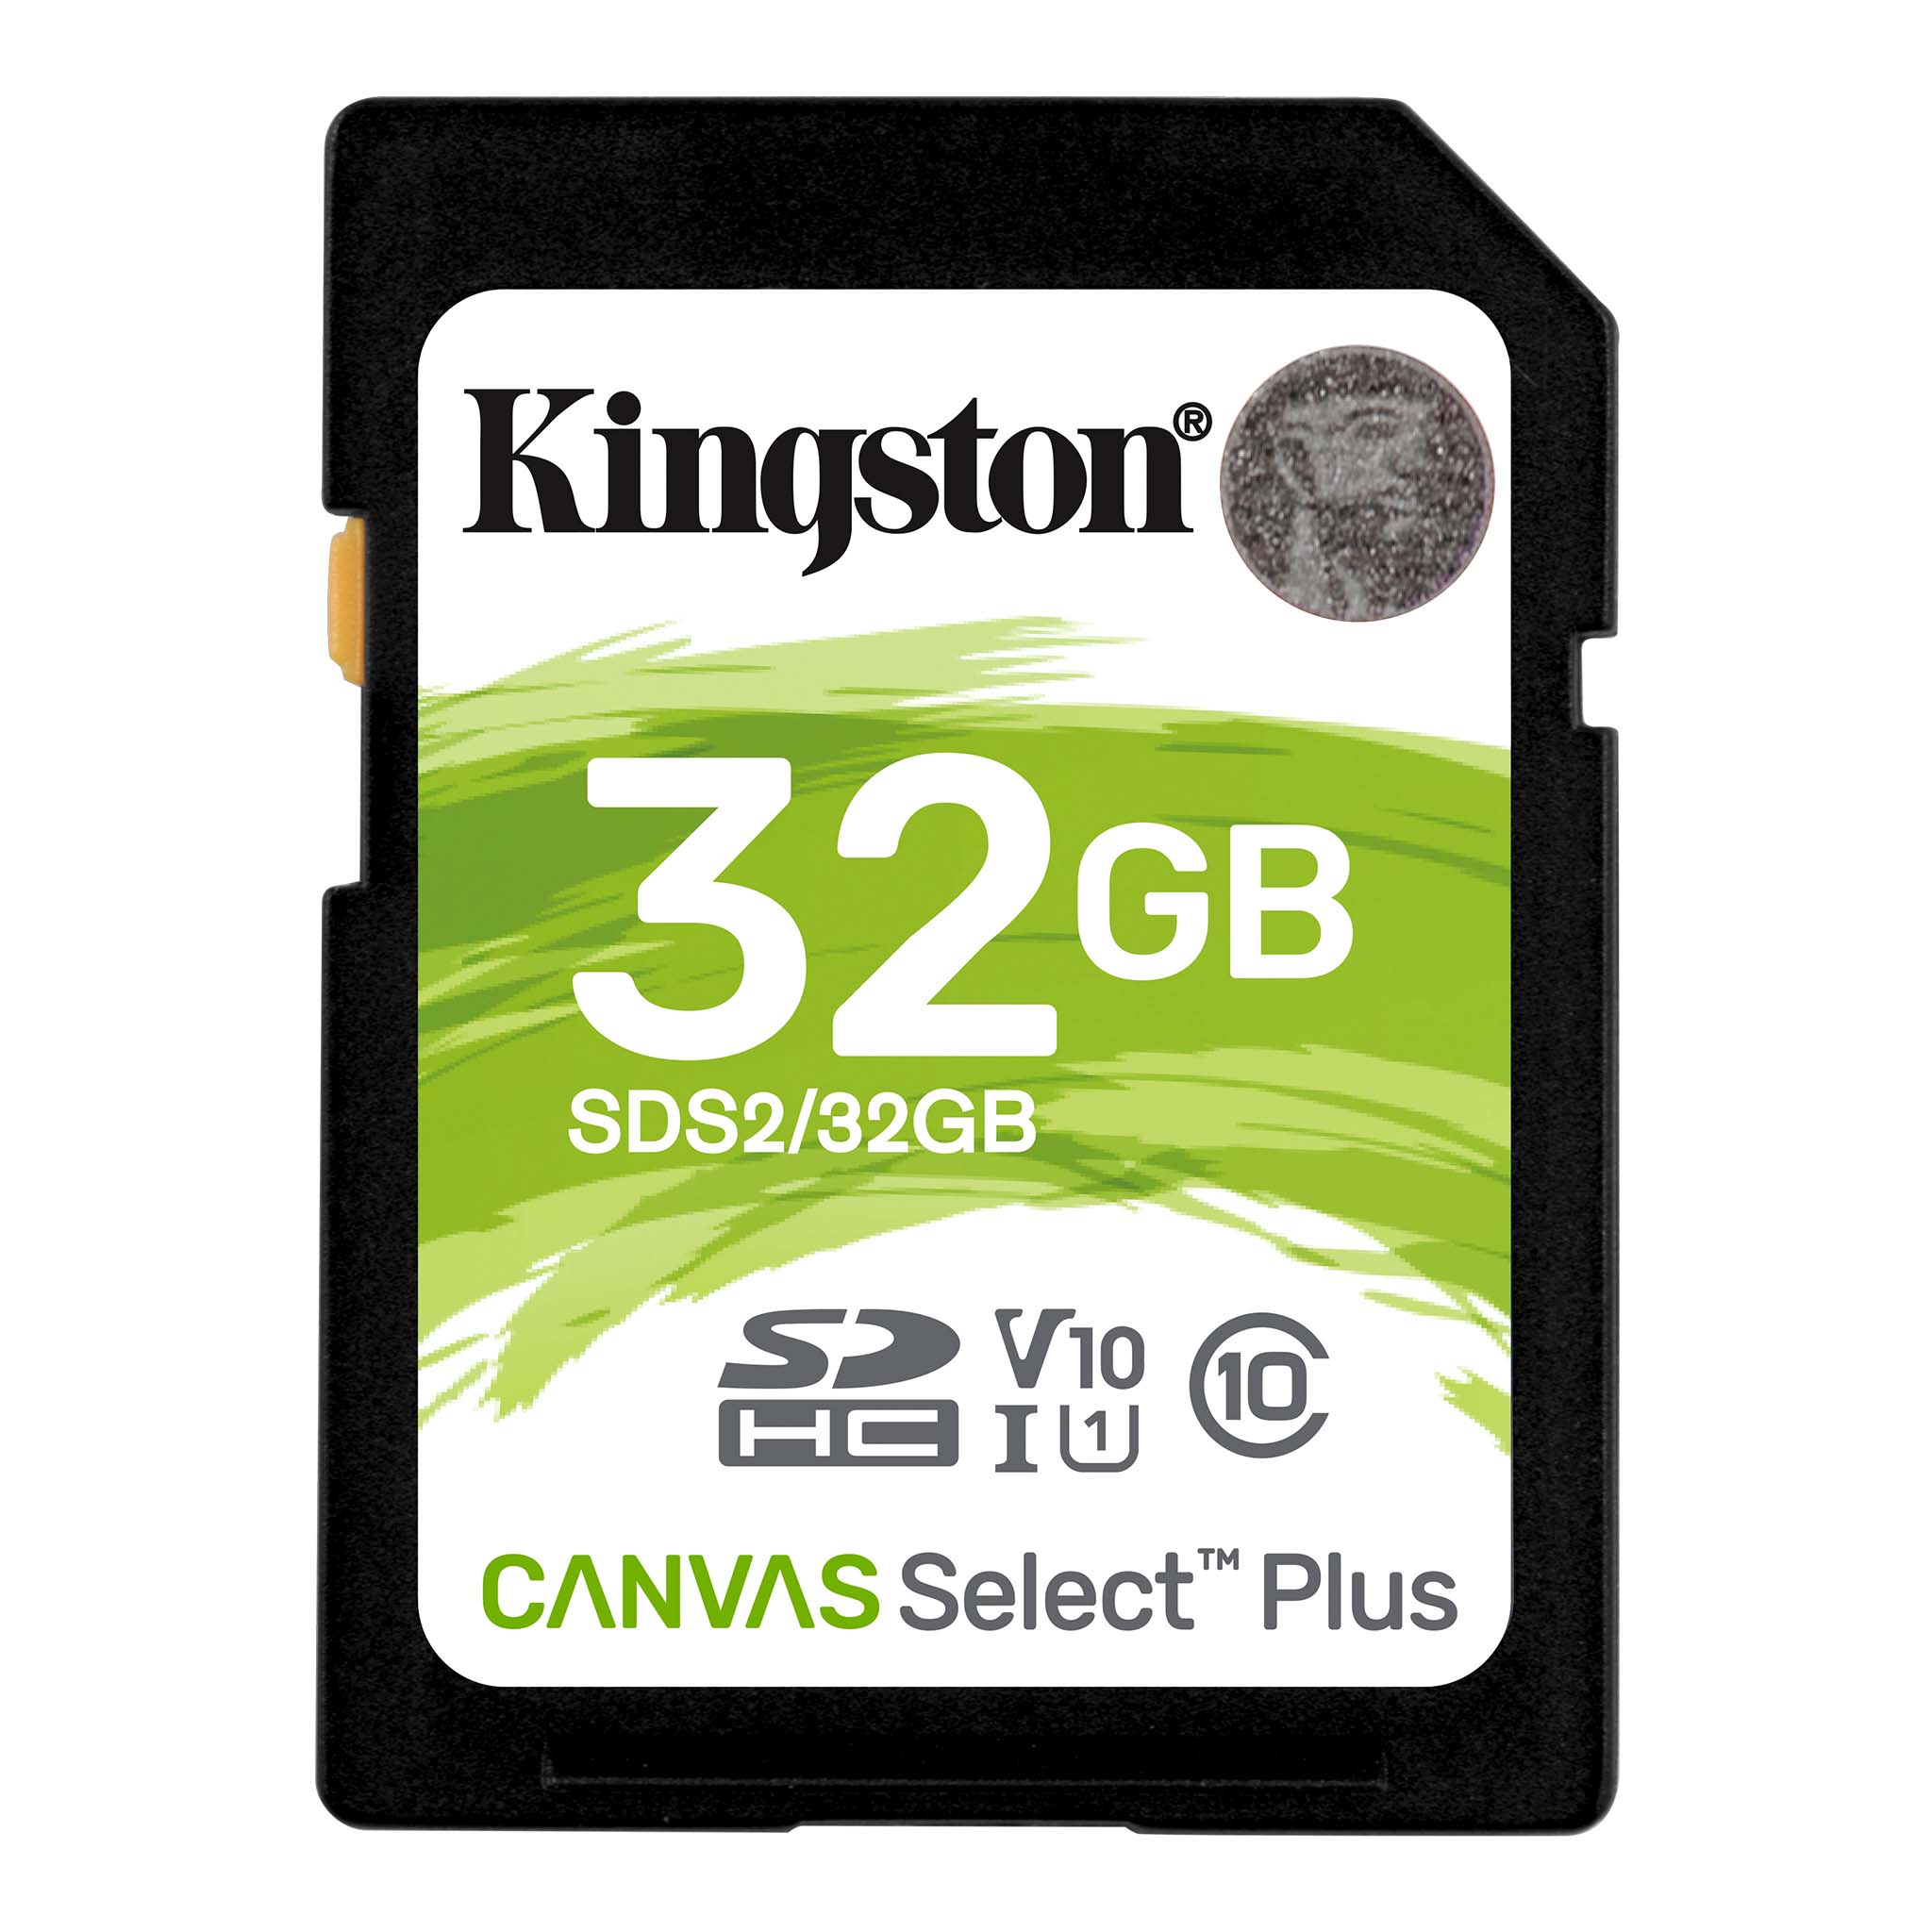 100MBs Works with Kingston Kingston 32GB Asus Zenfone 3 ZE520KL MicroSDHC Canvas Select Plus Card Verified by SanFlash. 